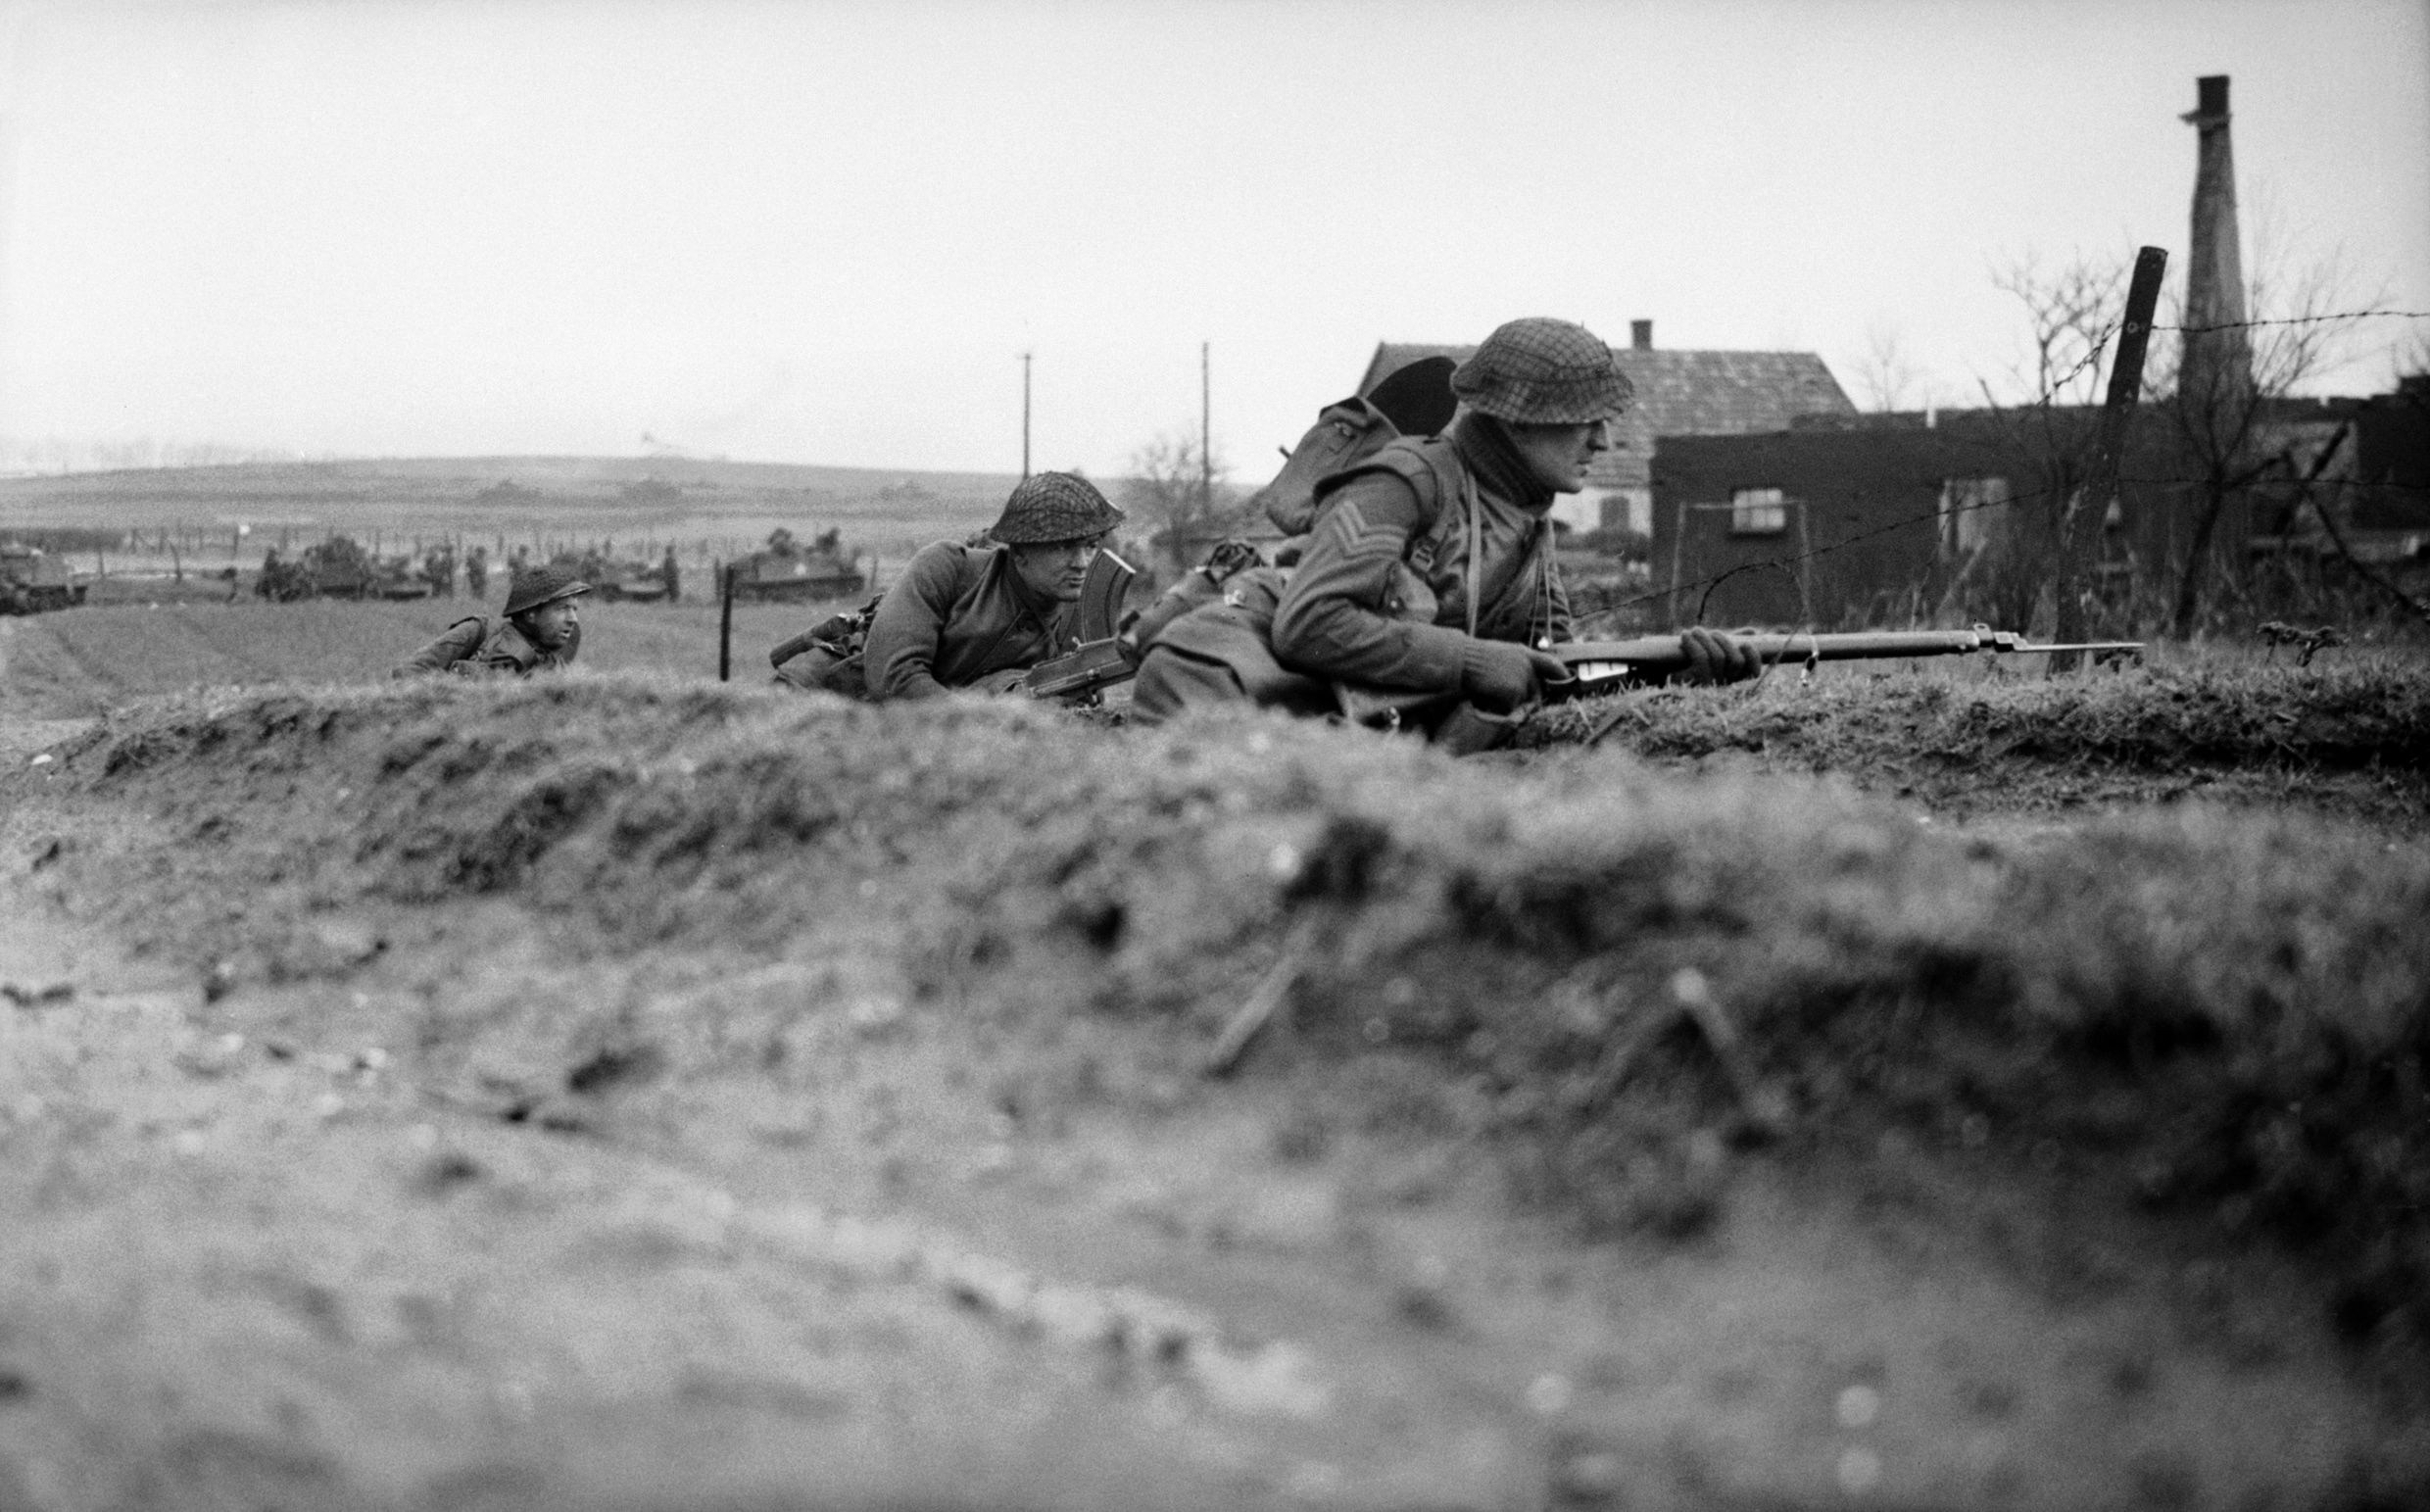 A British infantryman, his bayonet fixed, peers warily from a roadside as he prepares to move forward with comrades during the early stage of Operation Veritable.  Note the concentration of armored vehicles in the background.